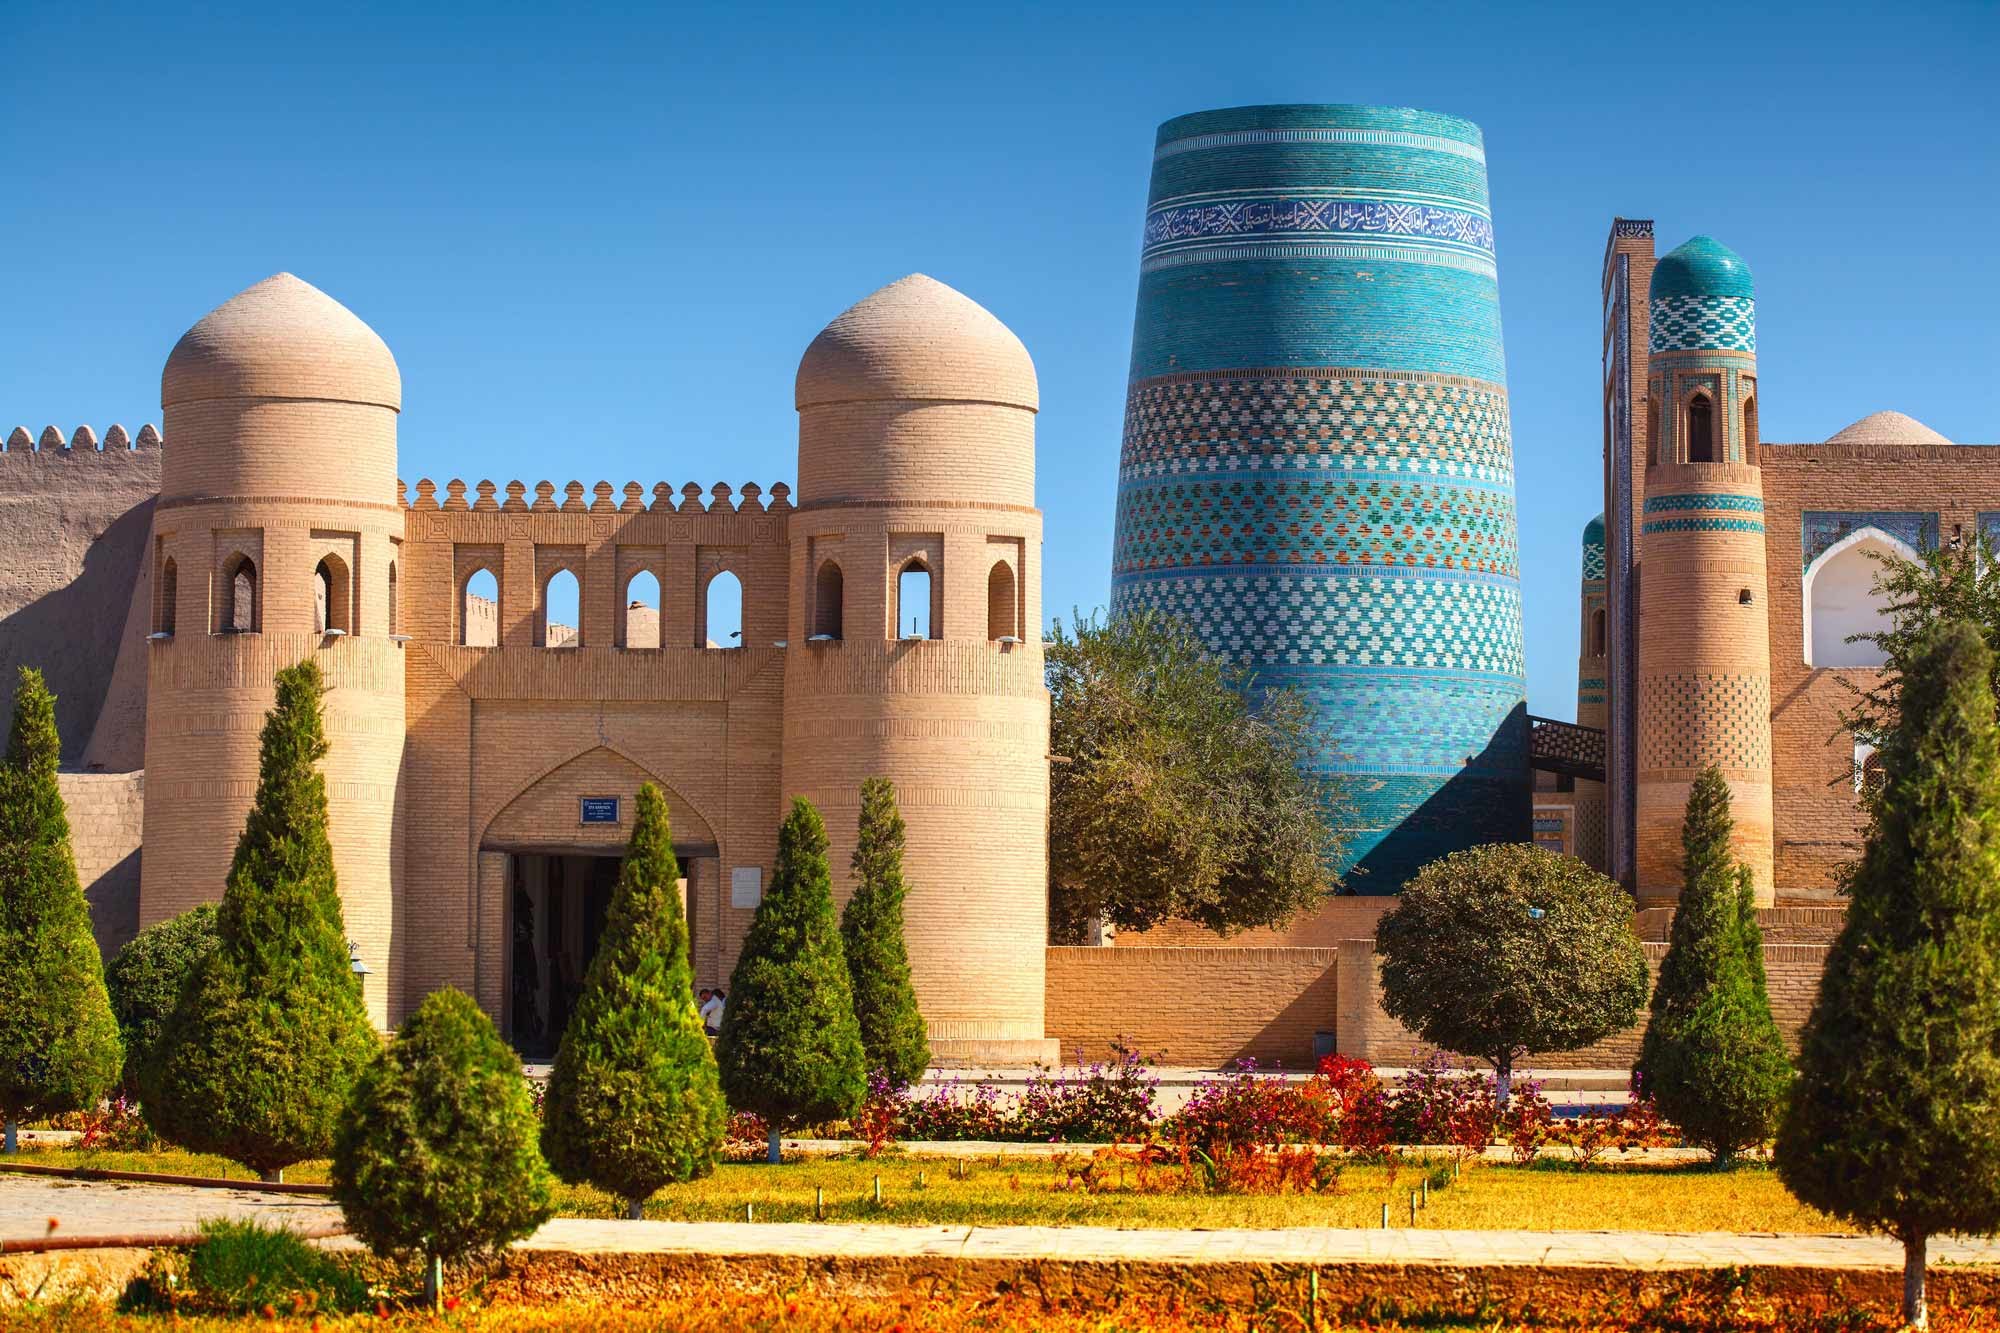 The most beautiful cities in the world - Samarkand - YouTube